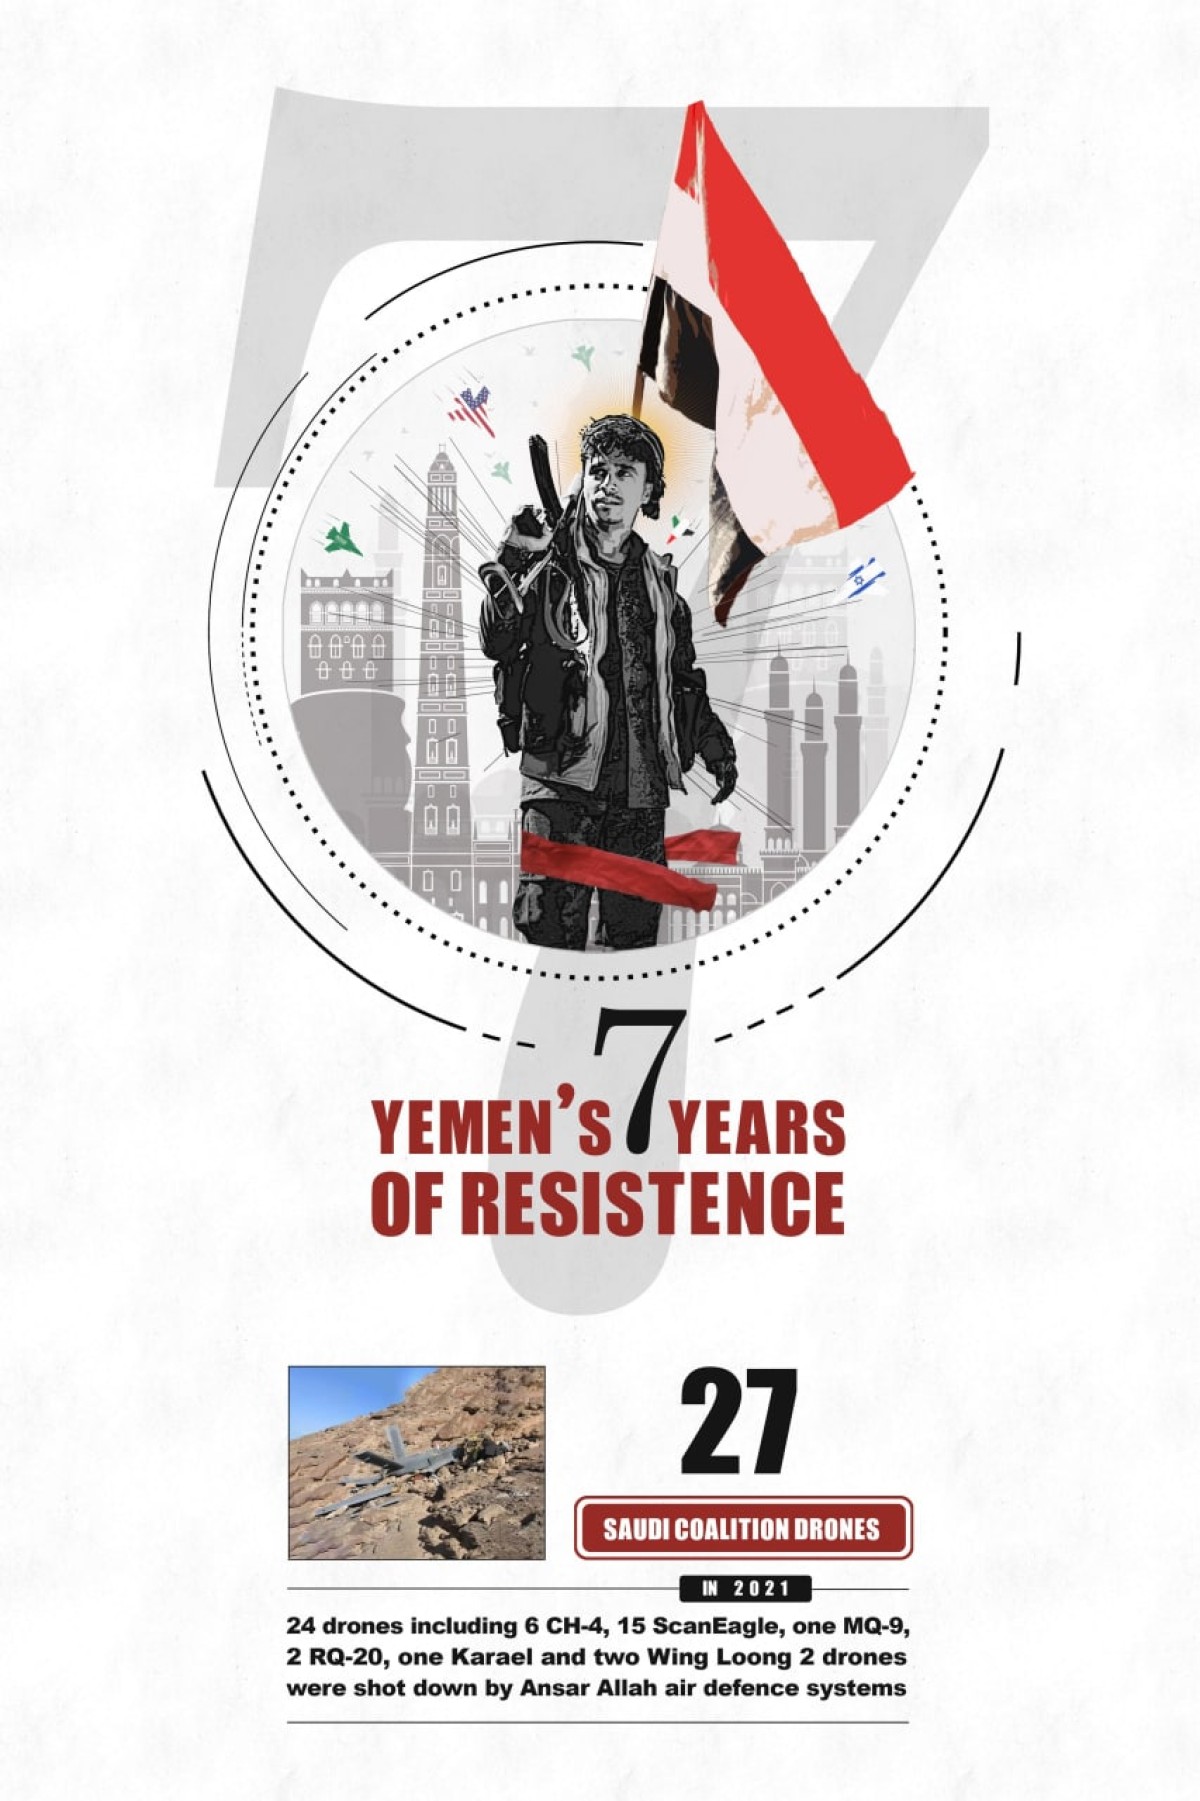  7 years of resistance poster collection in Yemen